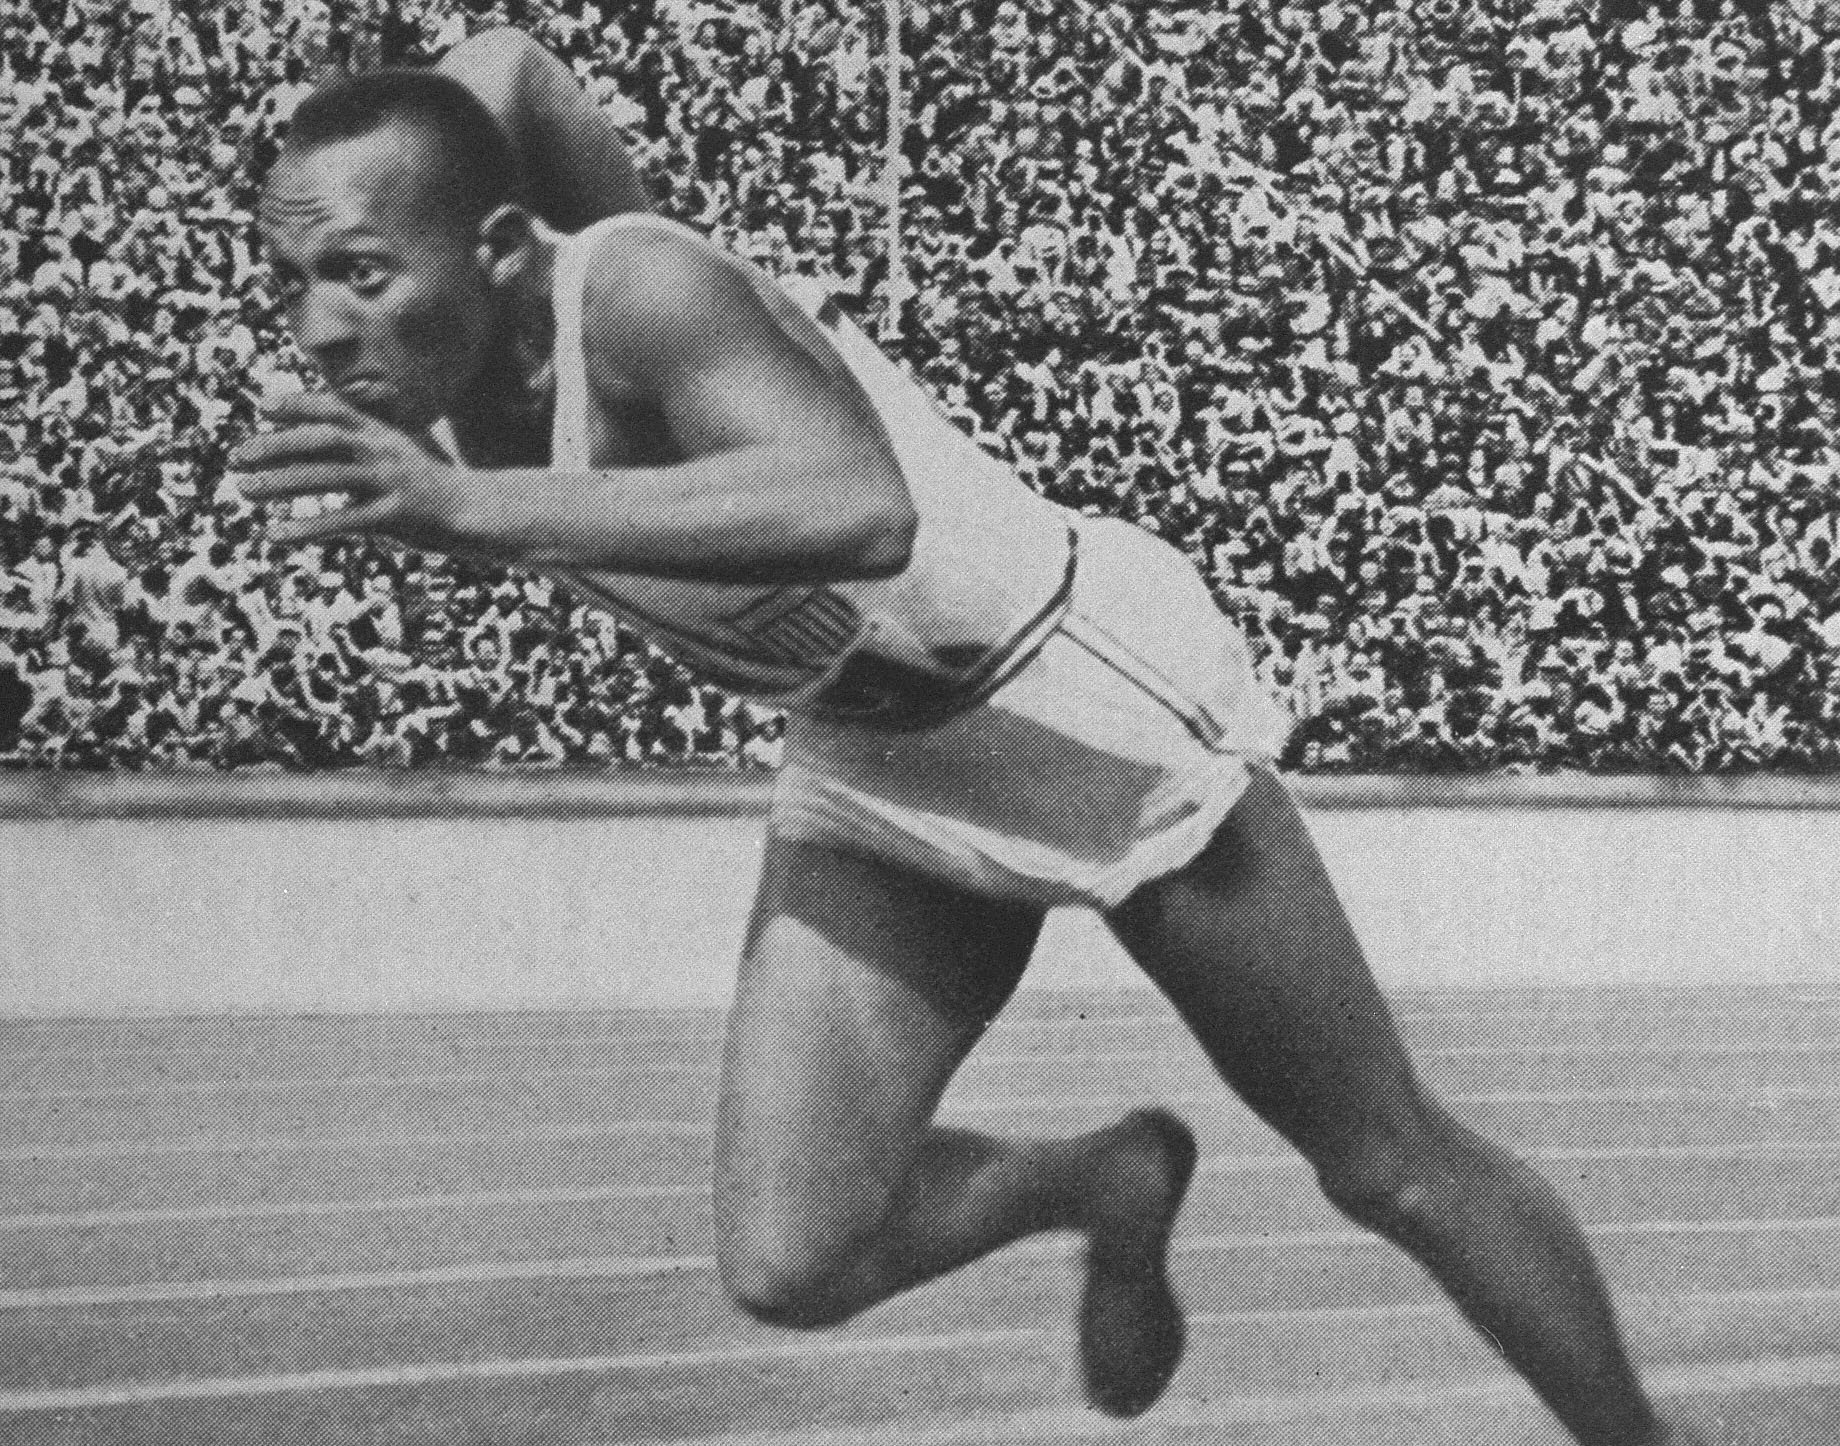 American Olympic athlete Jesse Owens running his historic 200 meter race at the 1936 Berlin Olympics. (Courtesy of the U.S. Holocaust Memorial Museum/Library of Congress)